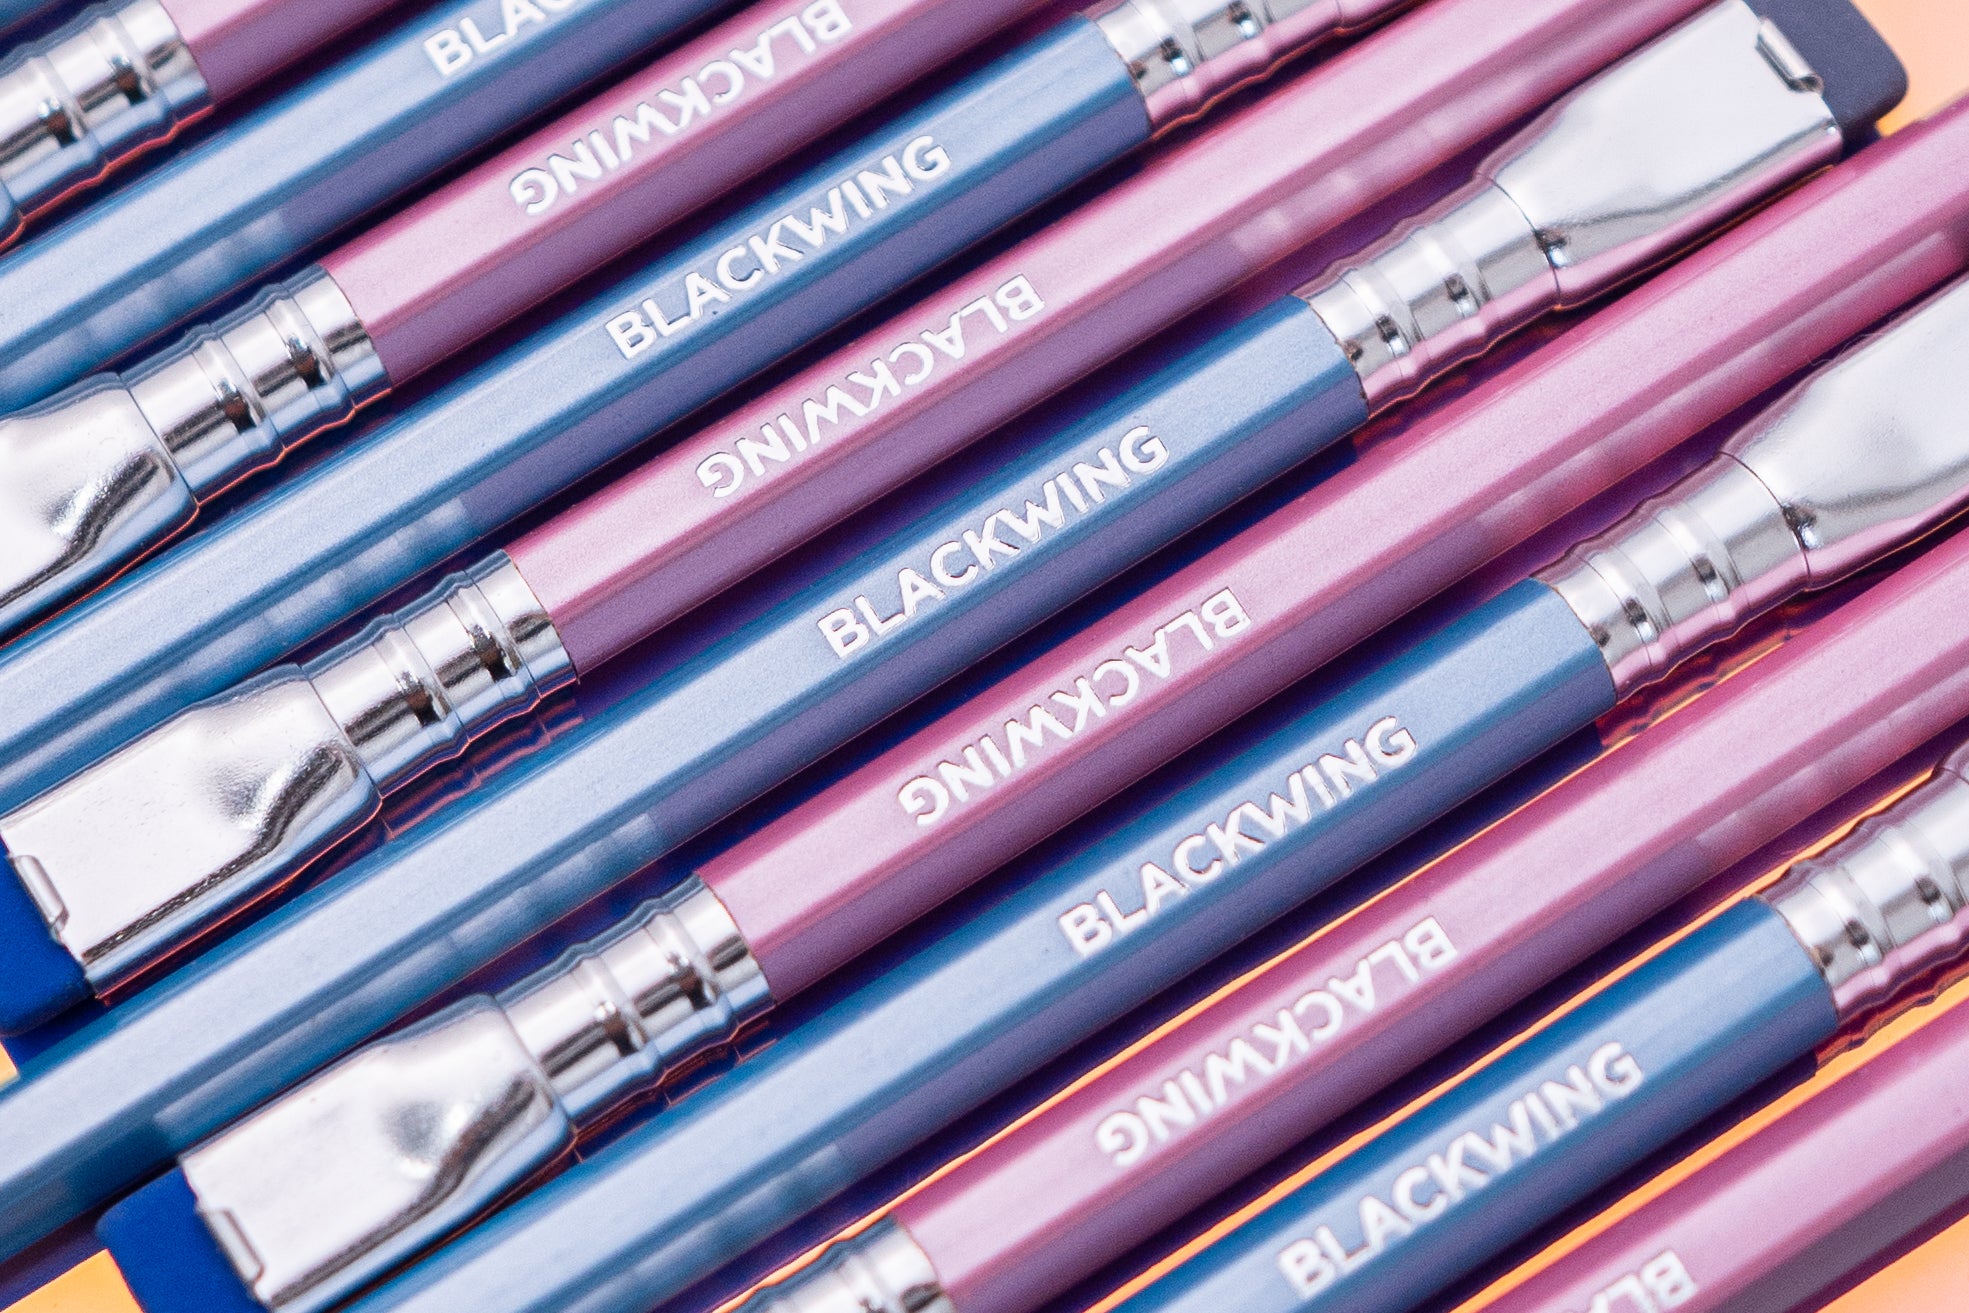 A group of Blackwing Pearl - Blue (Set of 12) pens, featuring a graphite core and design inspired by the Blackwing Pearl.